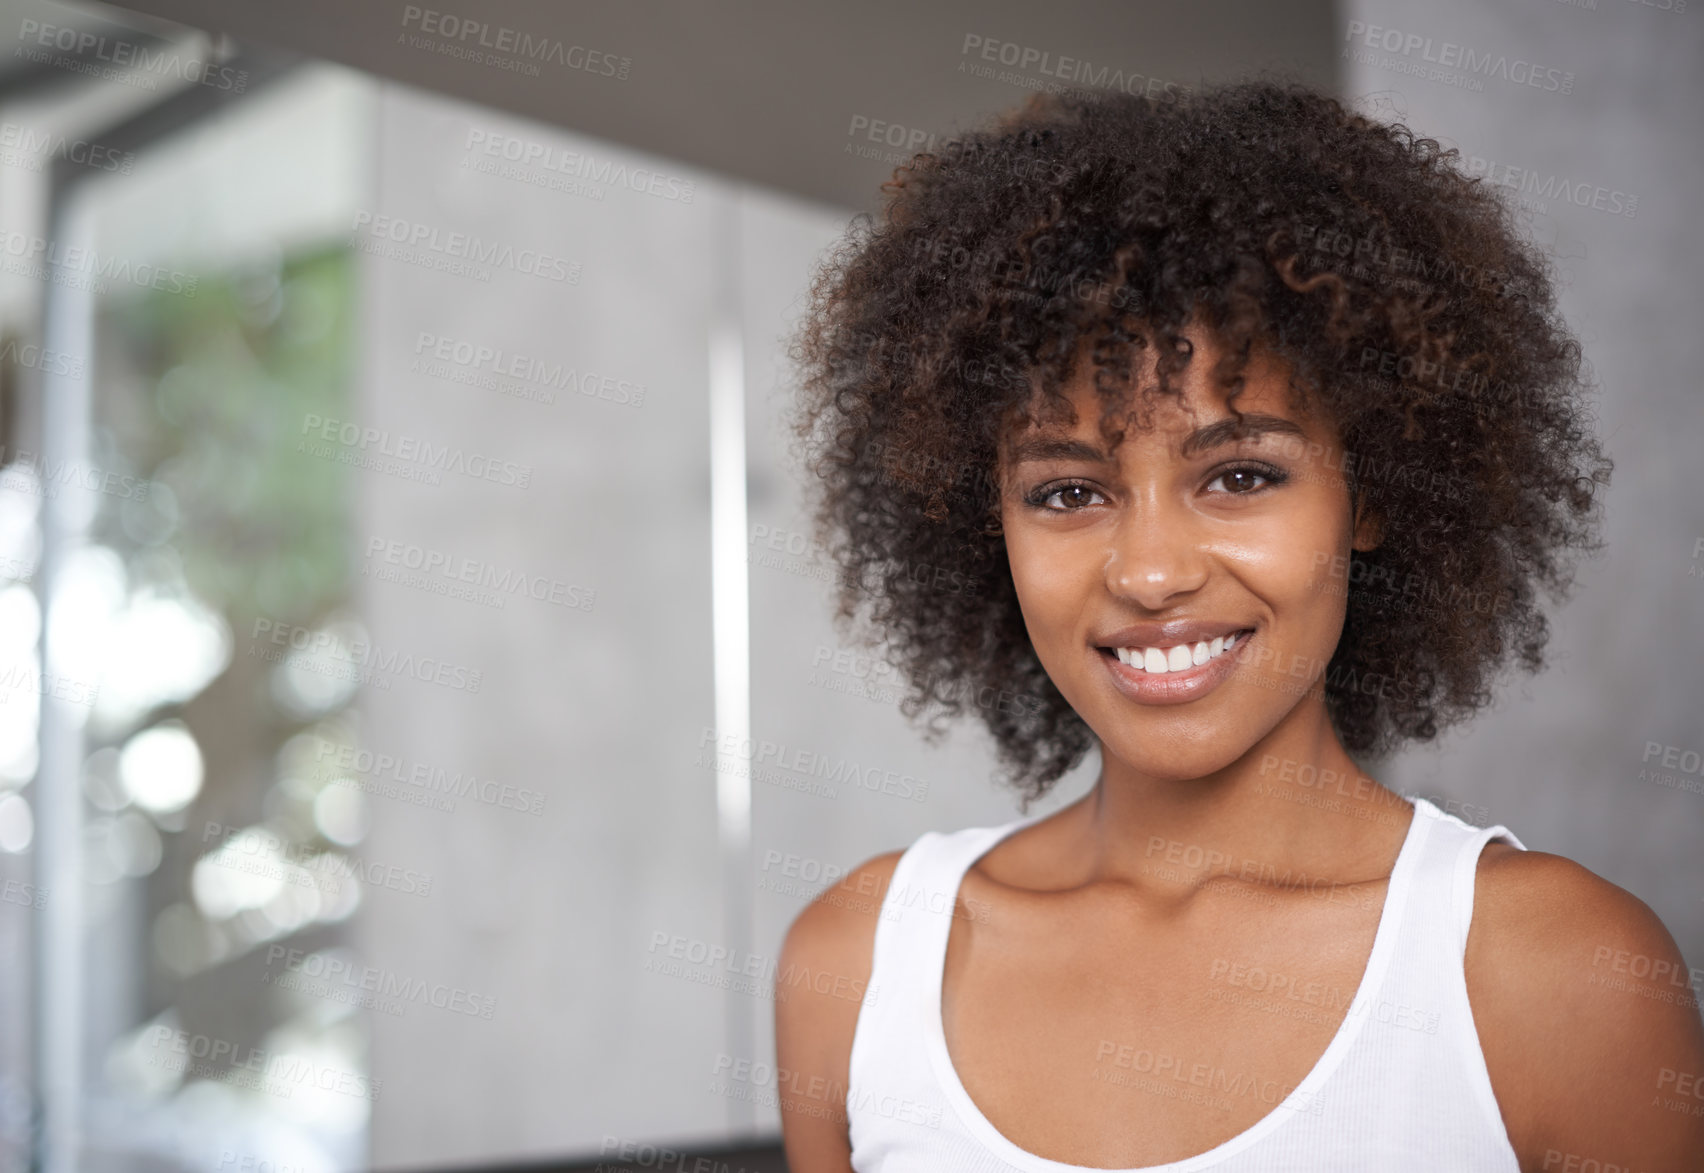 Buy stock photo Portrait of an attractive young woman standing in her home